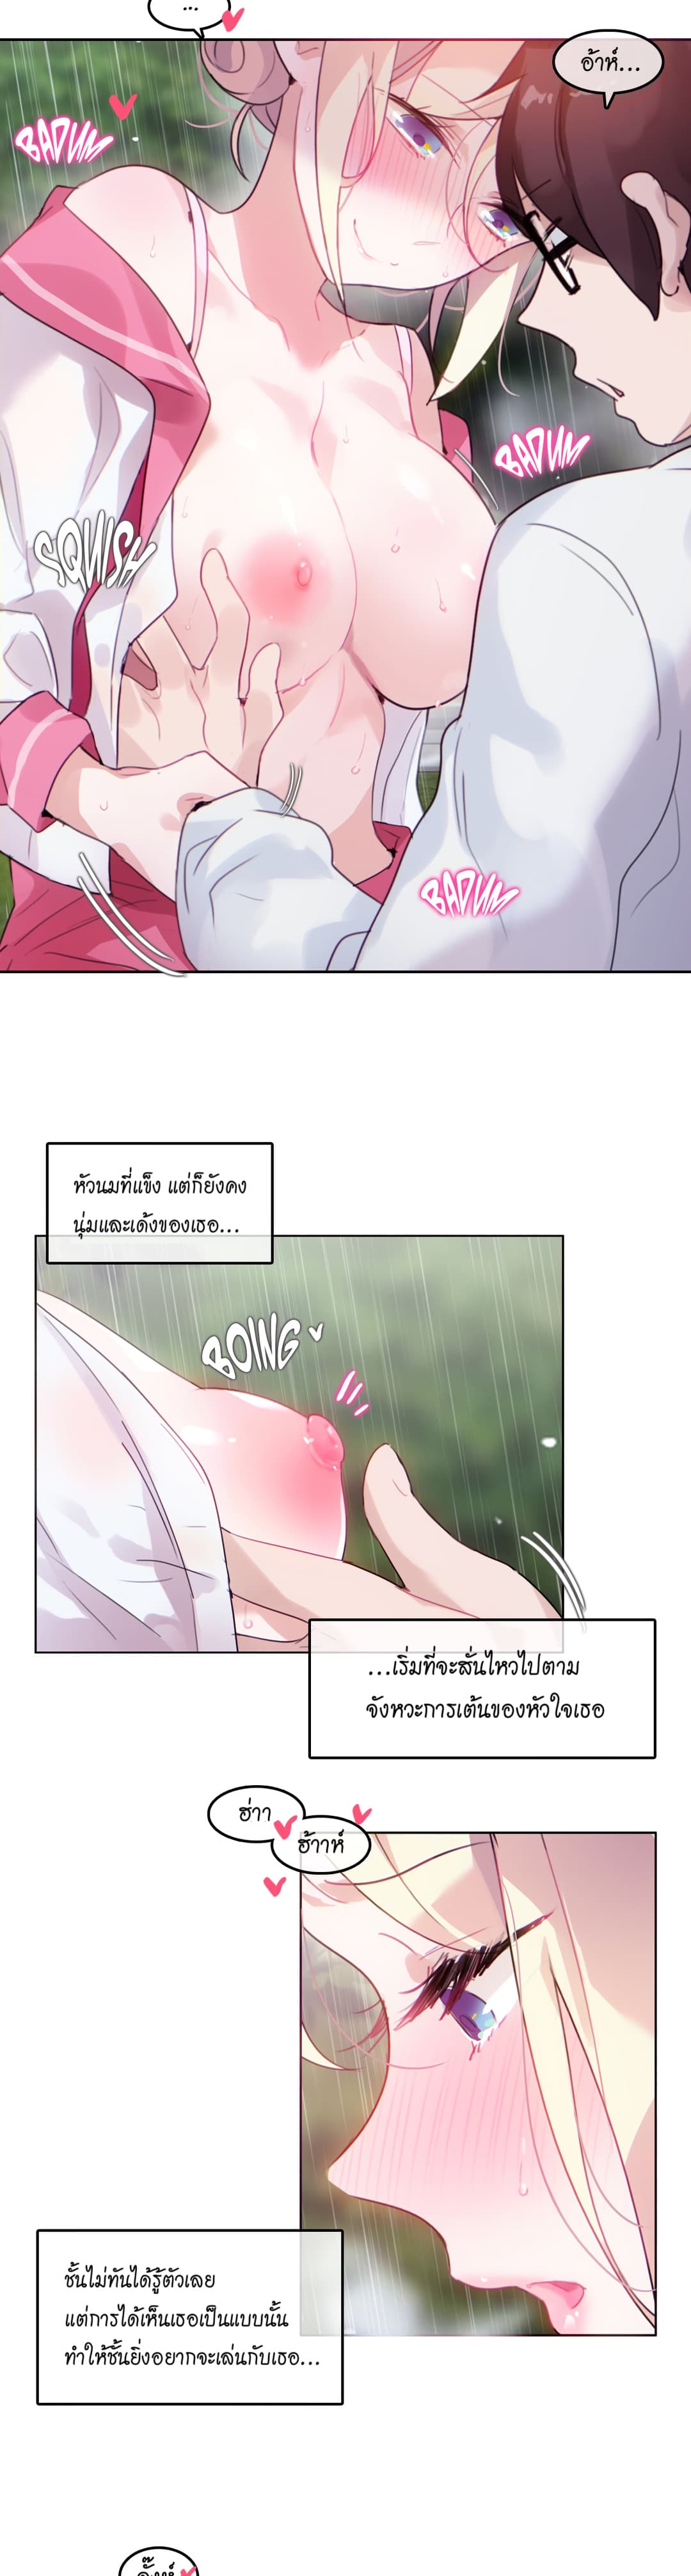 A Pervert’s Daily Life 30 (3)